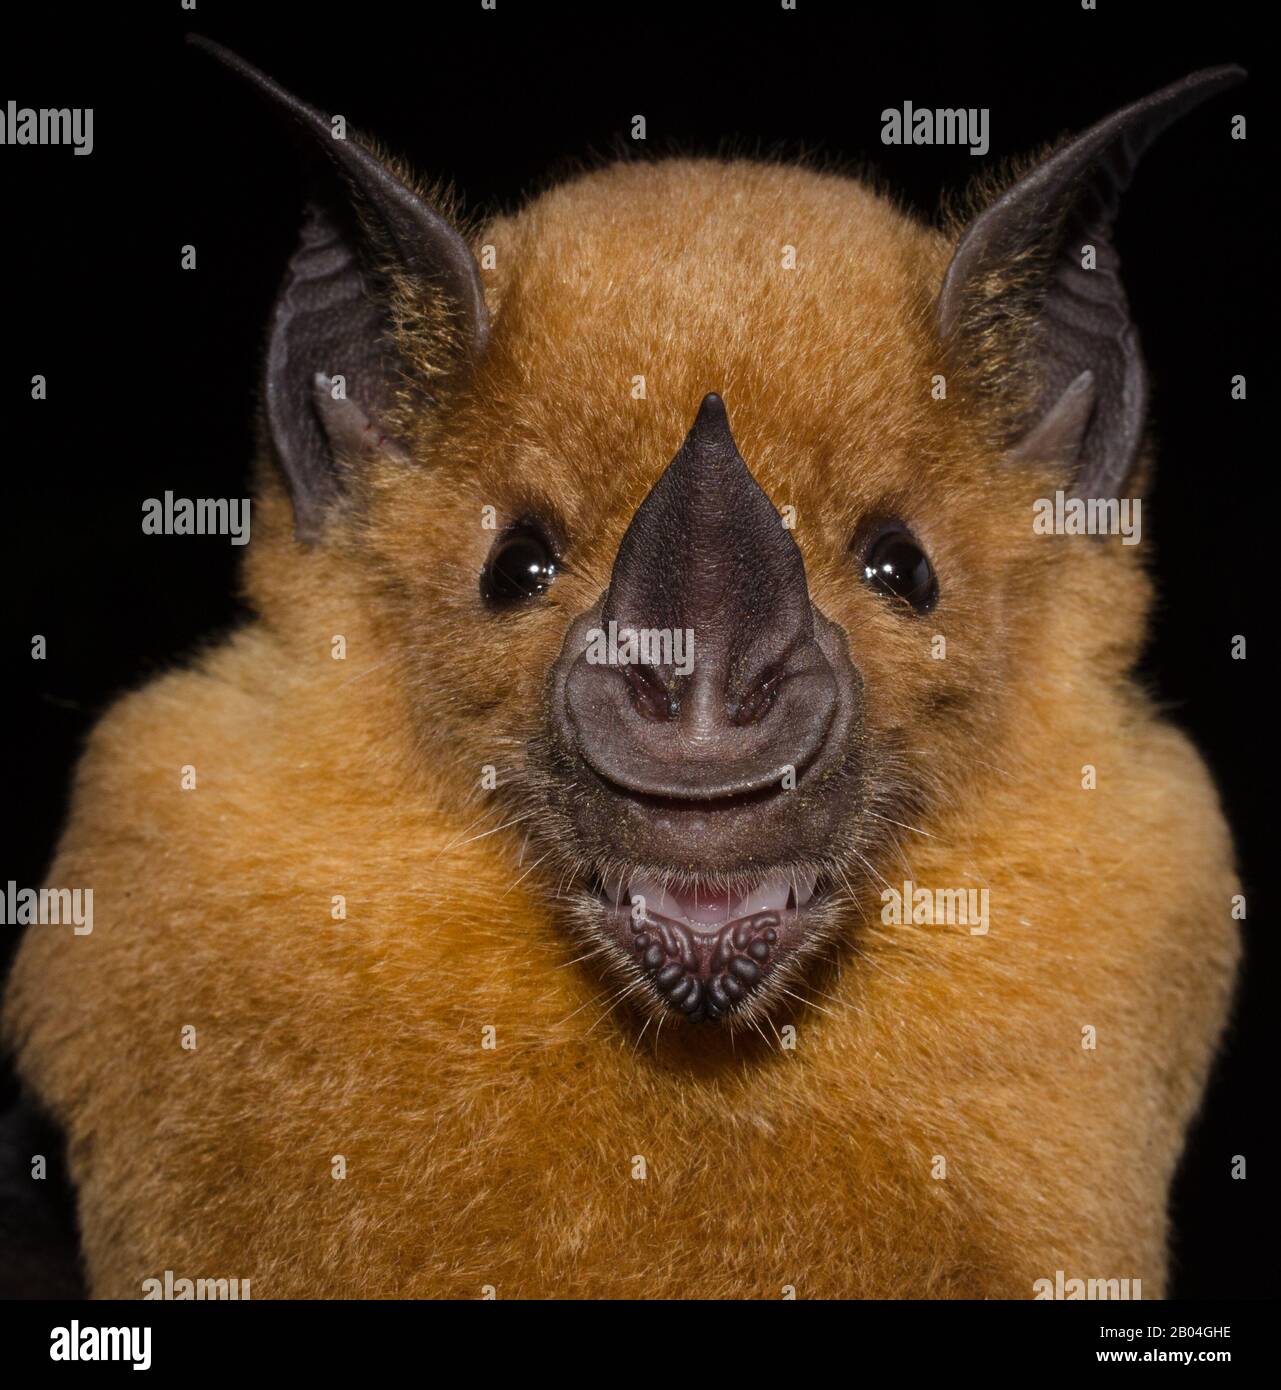 The greater spear-nosed bat (Phyllostomus hastatus) is a bat species of the family Phyllostomidae from South and Central America. Stock Photo